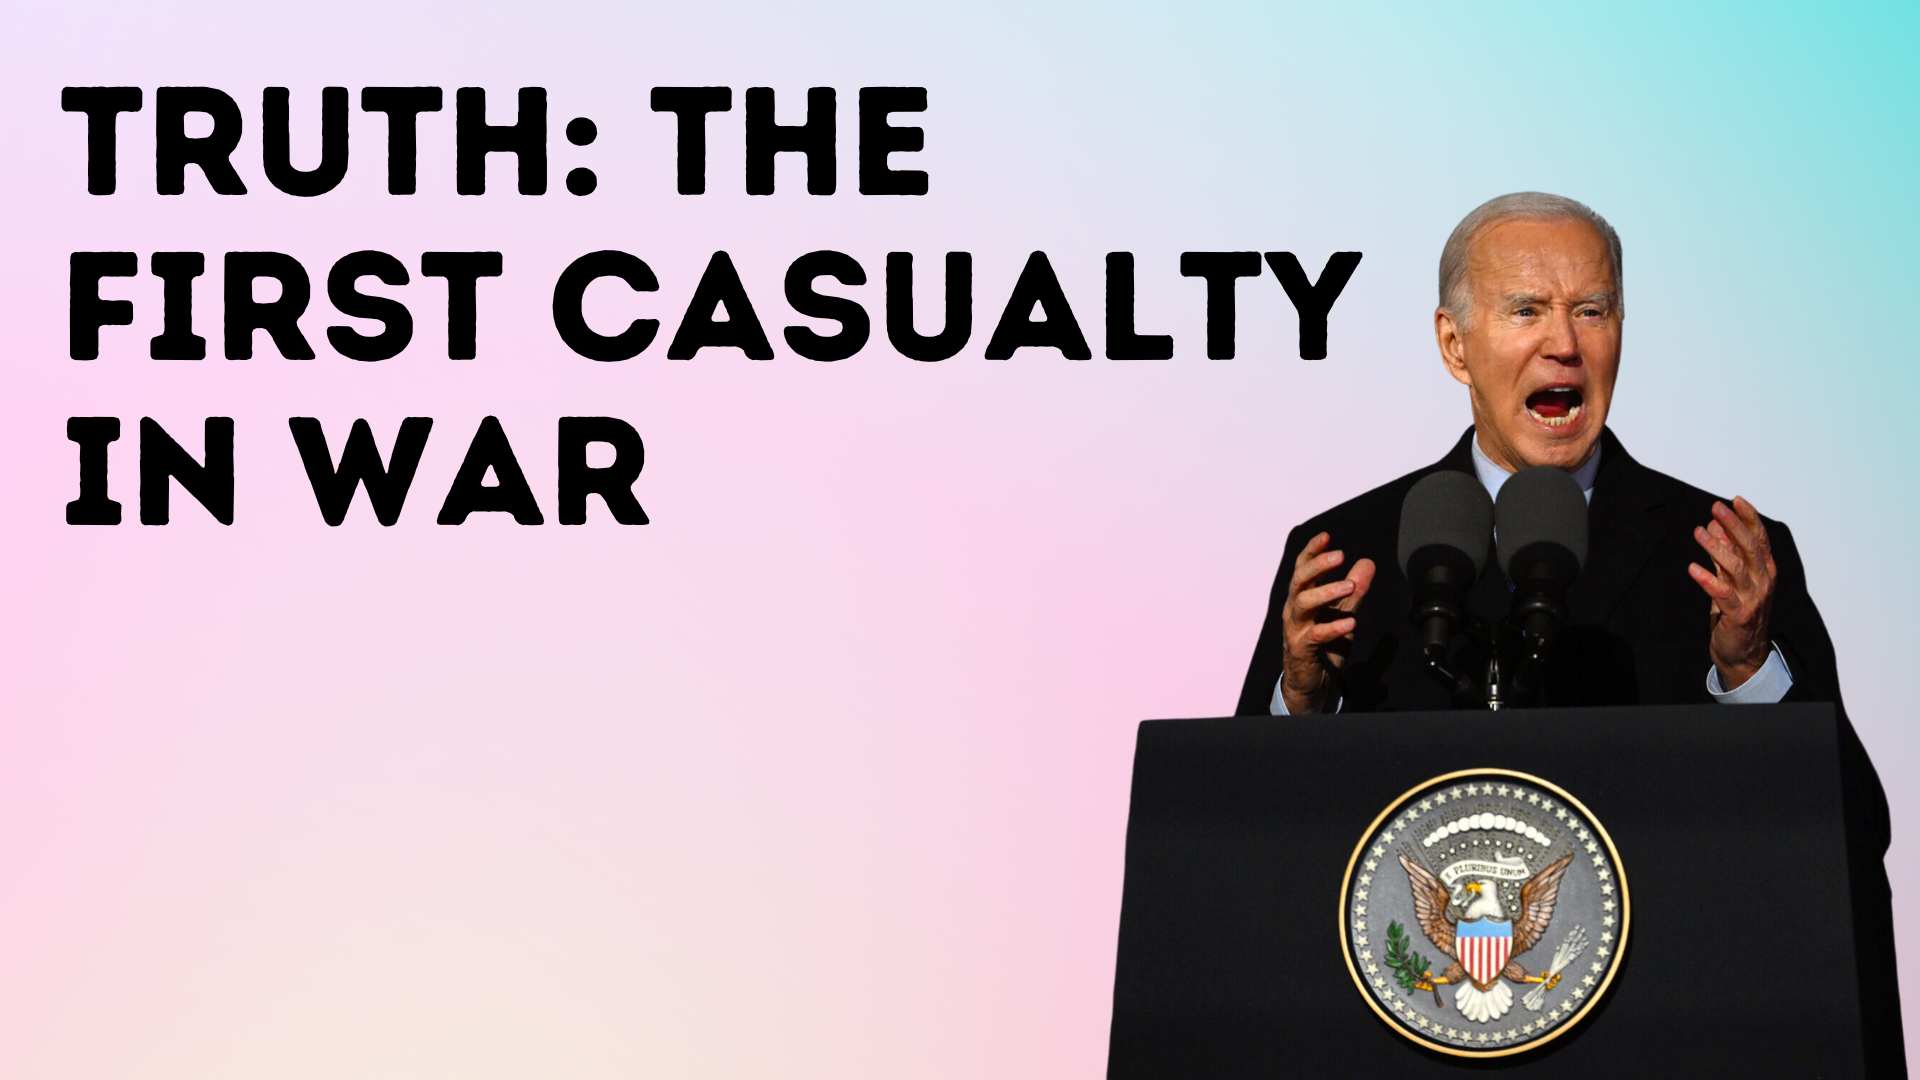 Truth: The First Casualty in War